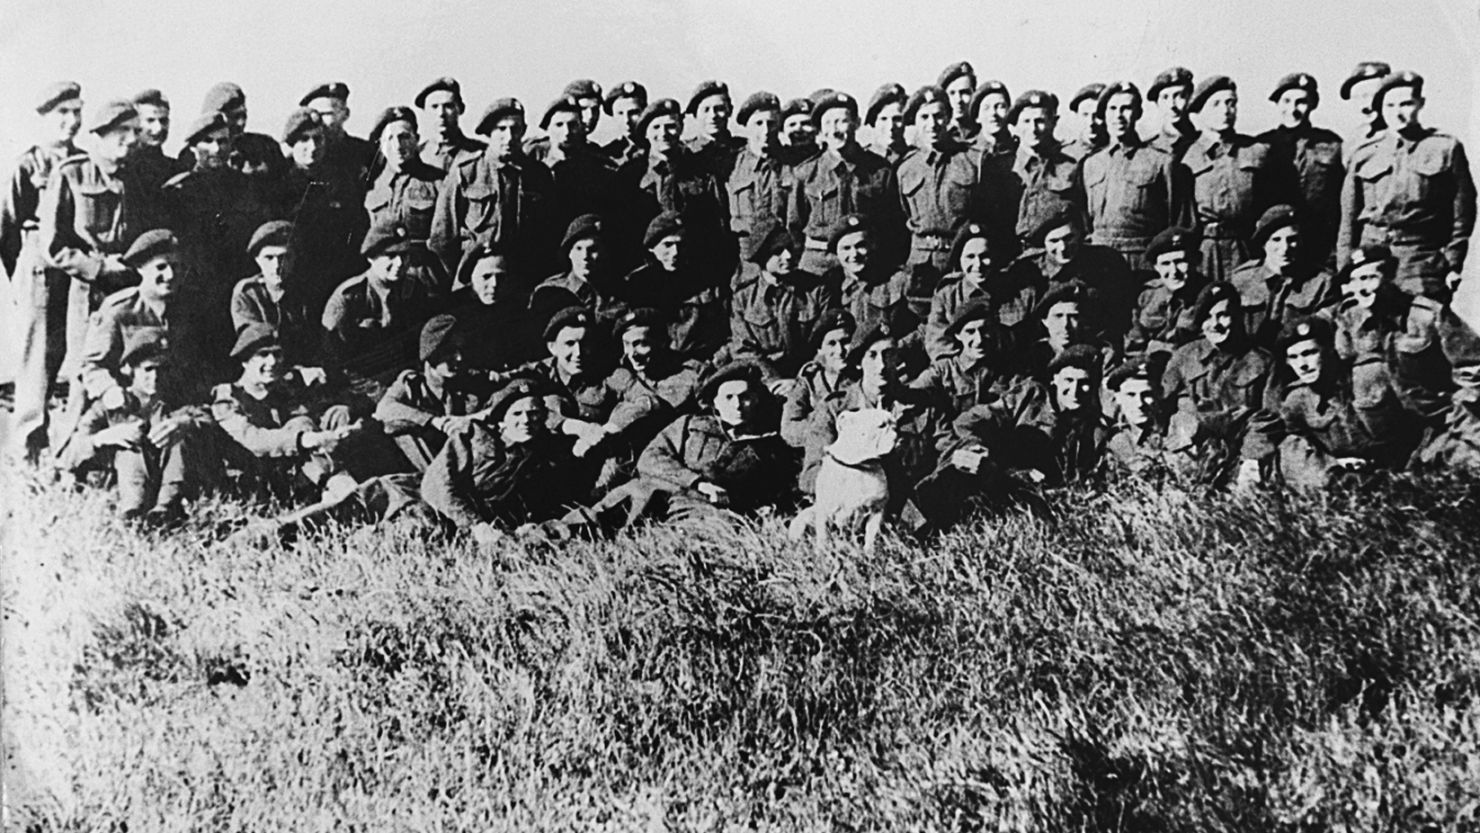 X Troop during training at Aberdovey, Wales, in 1943